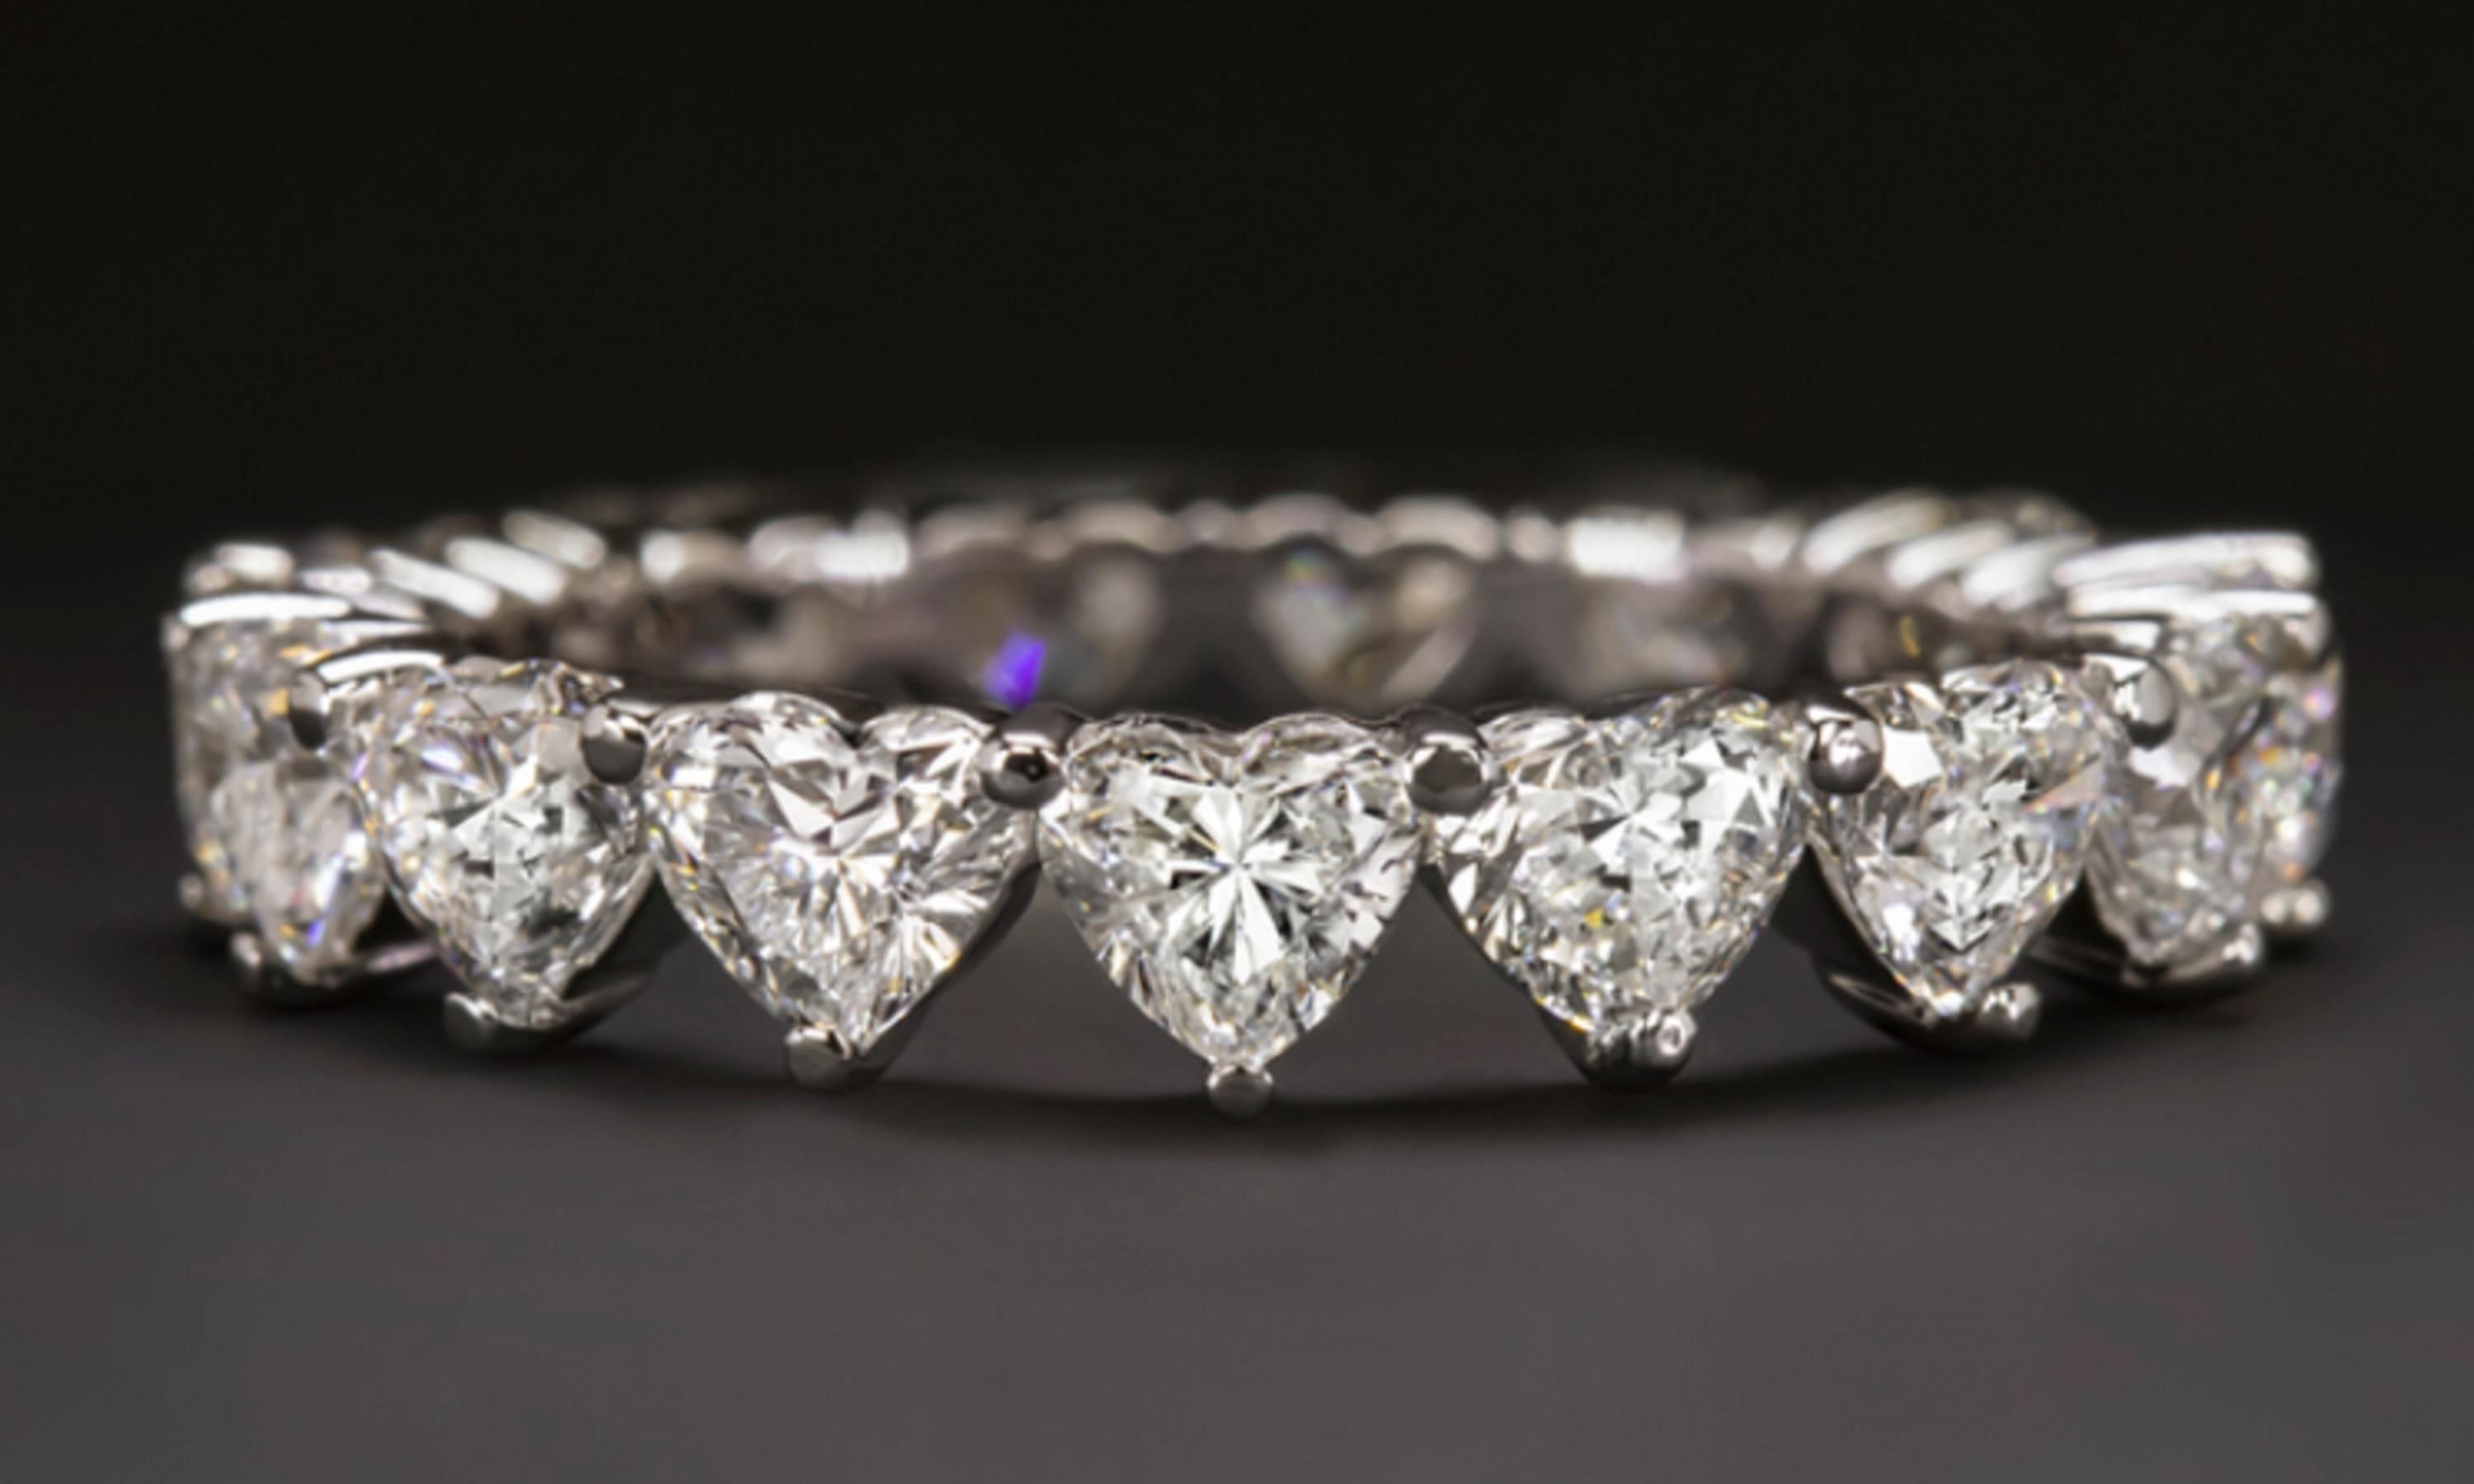 Eternity ring features approximately 3.04ct of vibrant heart shape diamonds set in an elegantly simple modern band. High quality, perfectly matched, and substantially sized diamonds cover the full diameter of the ring in dazzling sparkle. Bright